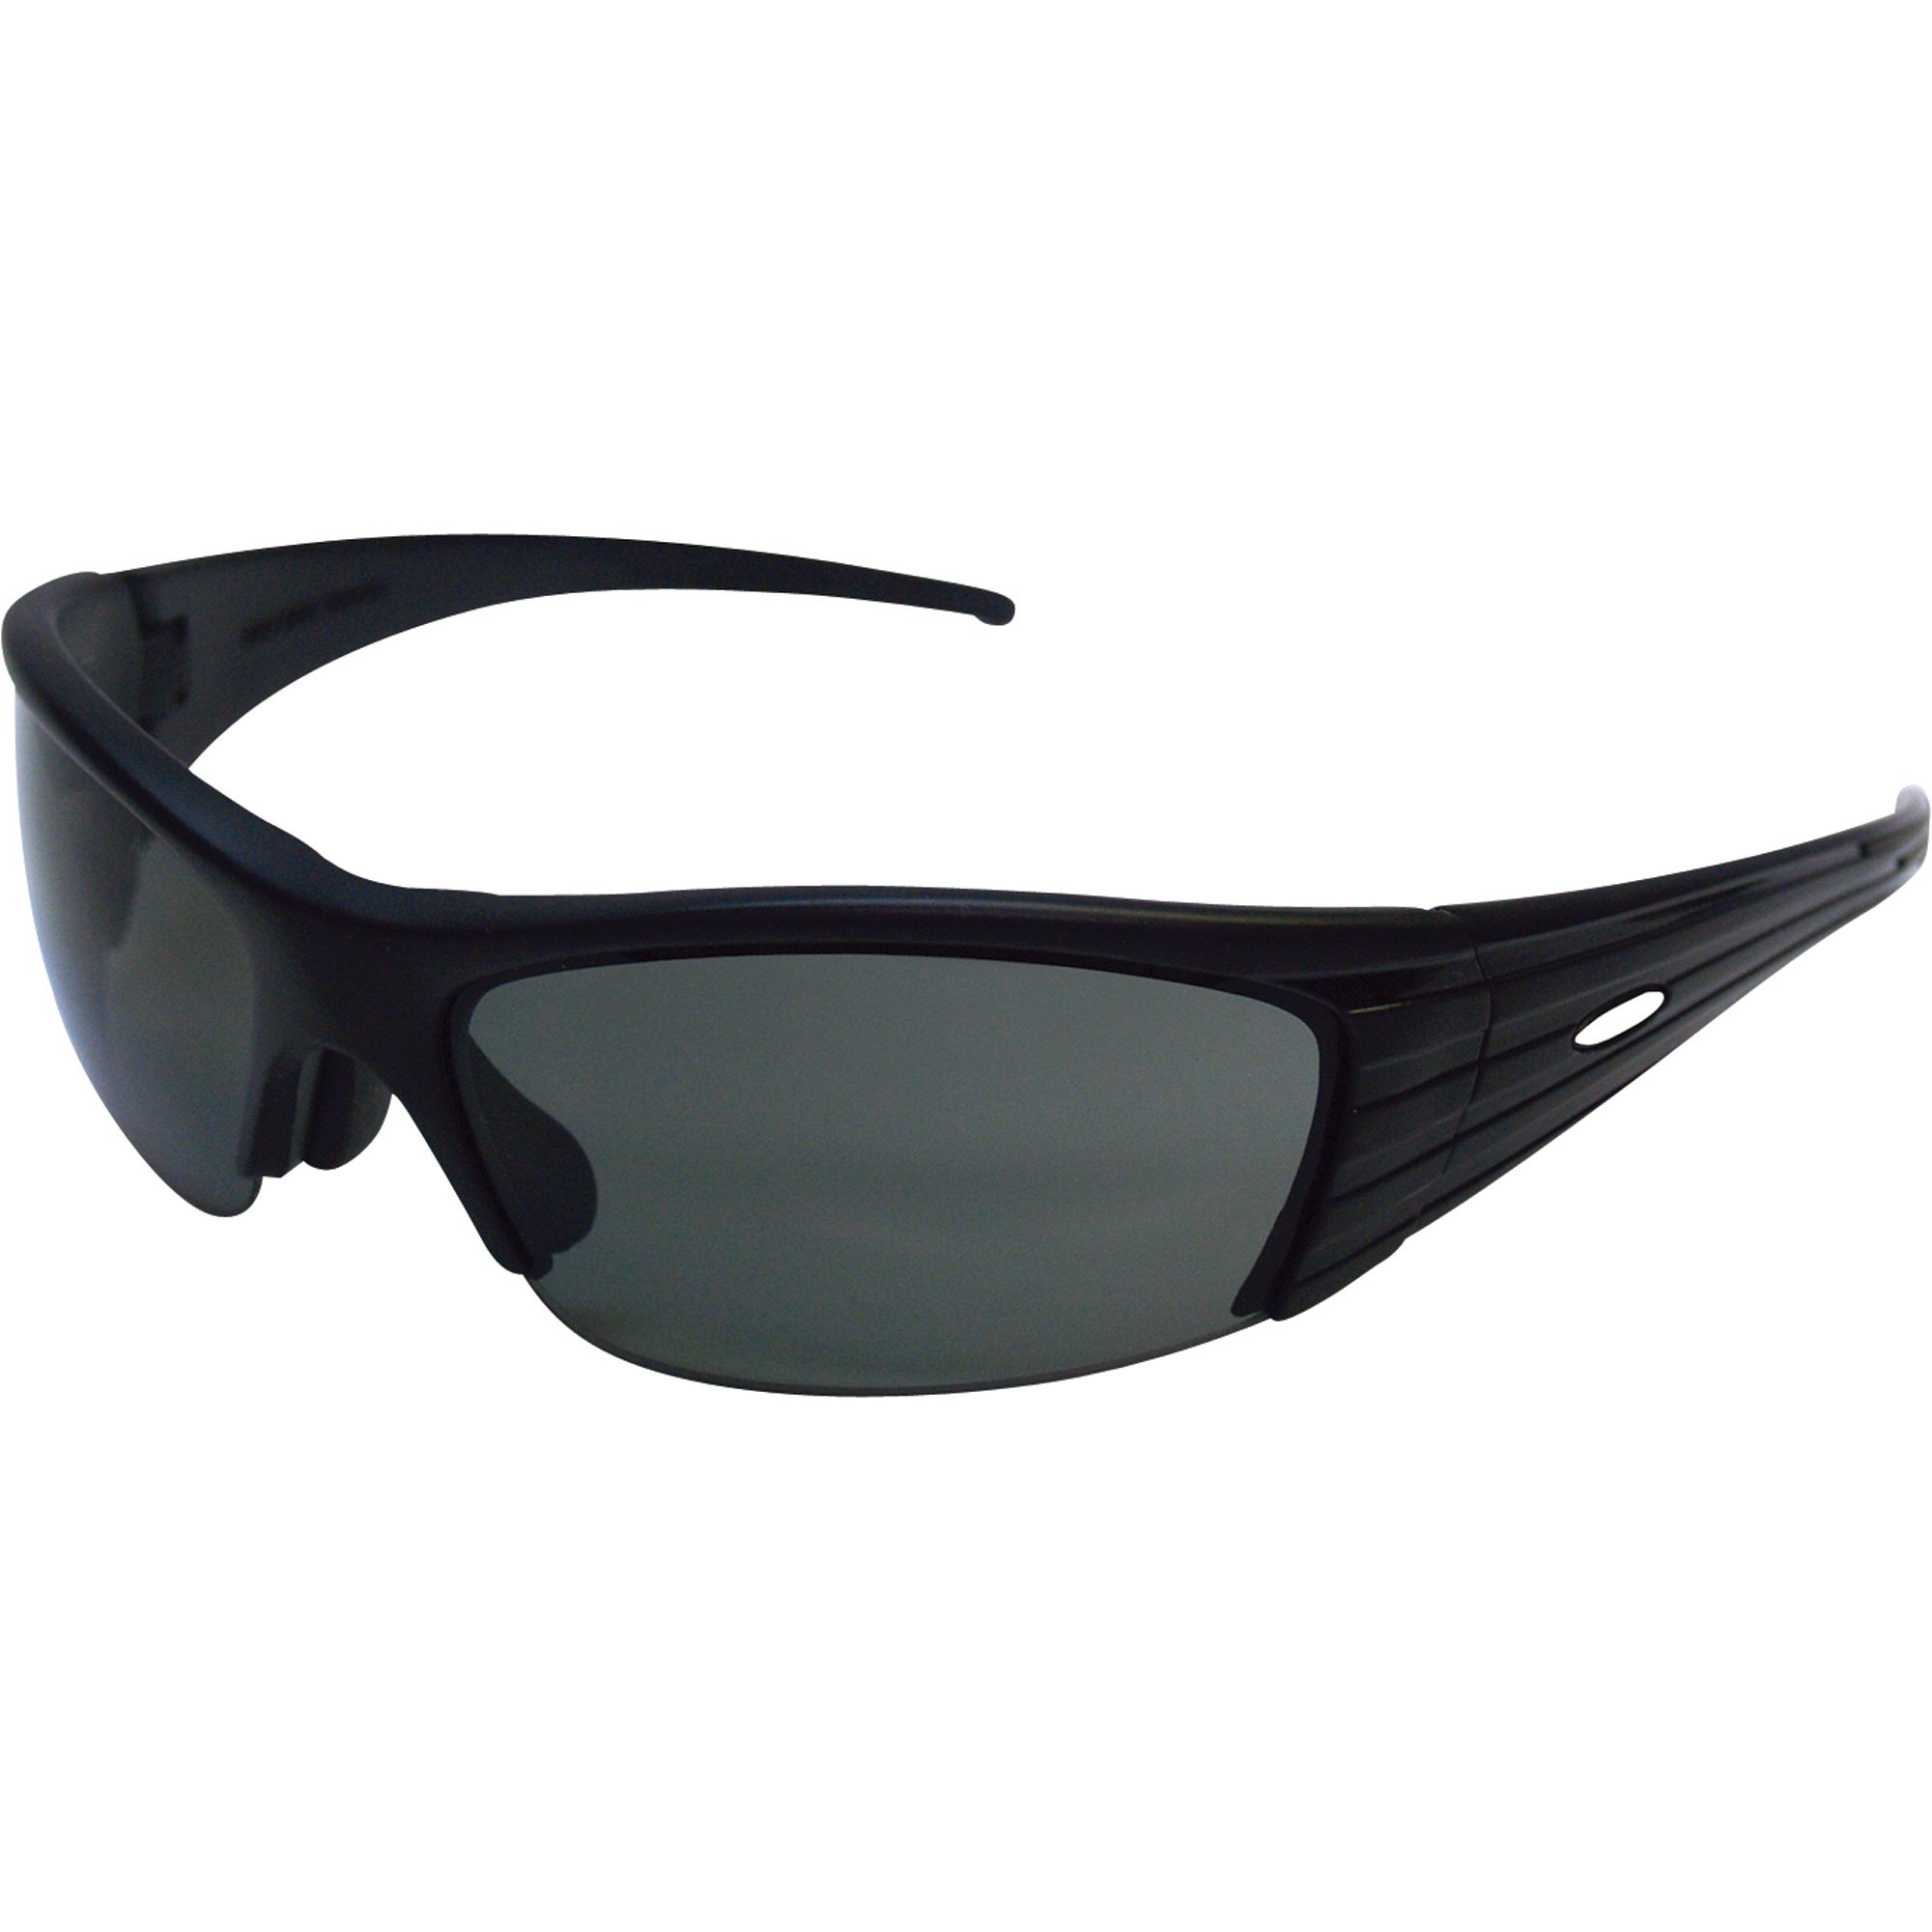 3M Fuel X2P Polarized Safety Glasses — Shaded Lens, Model# 90879-80025